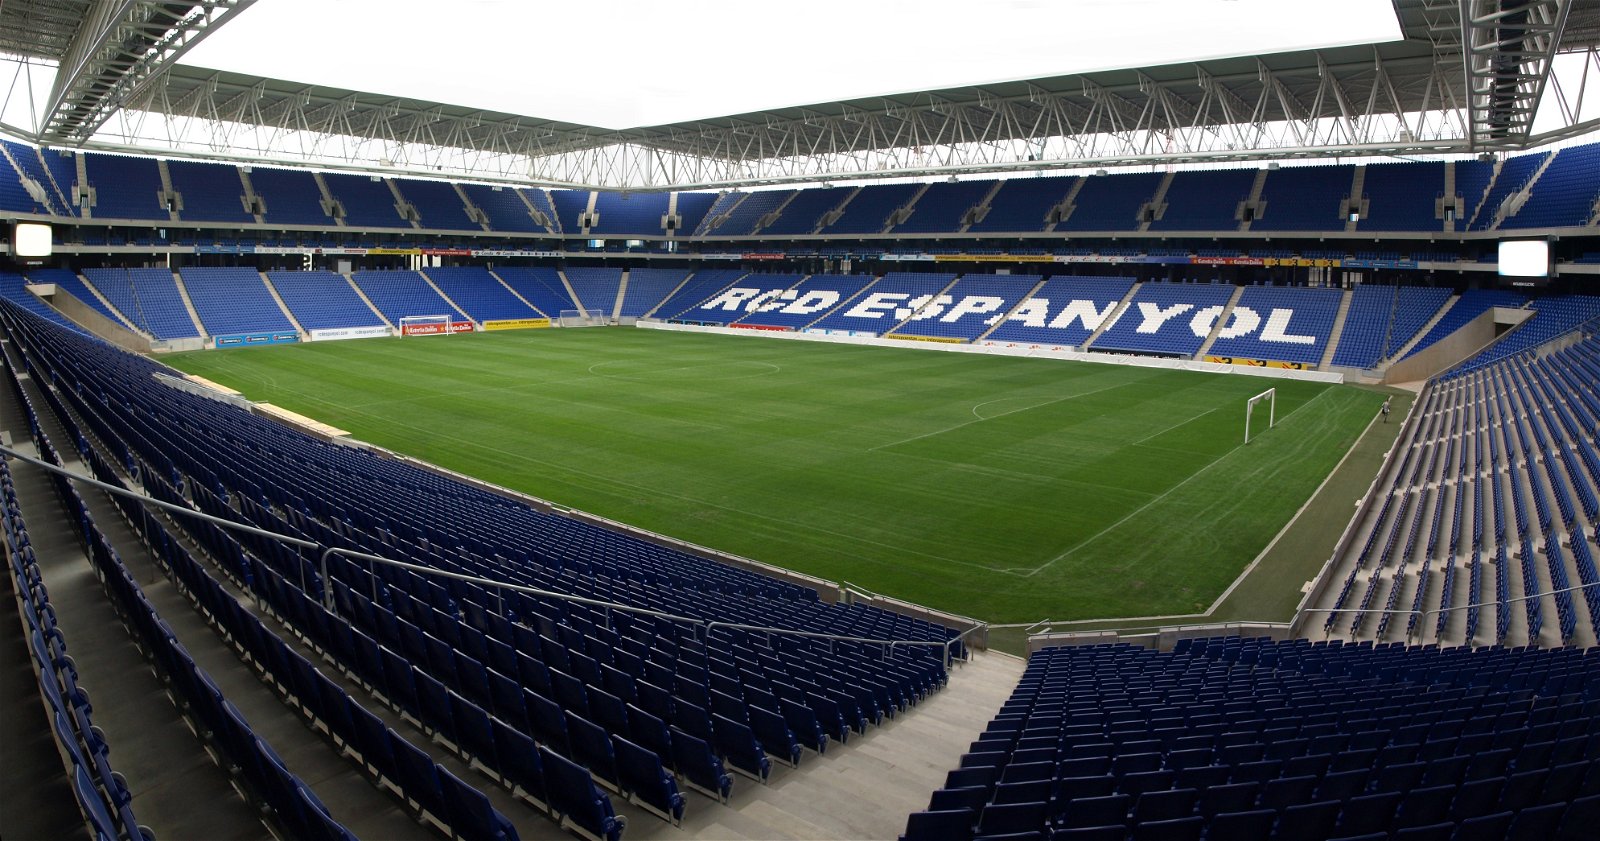 RCDE Stadium is one of the largest football stadiums in Spain